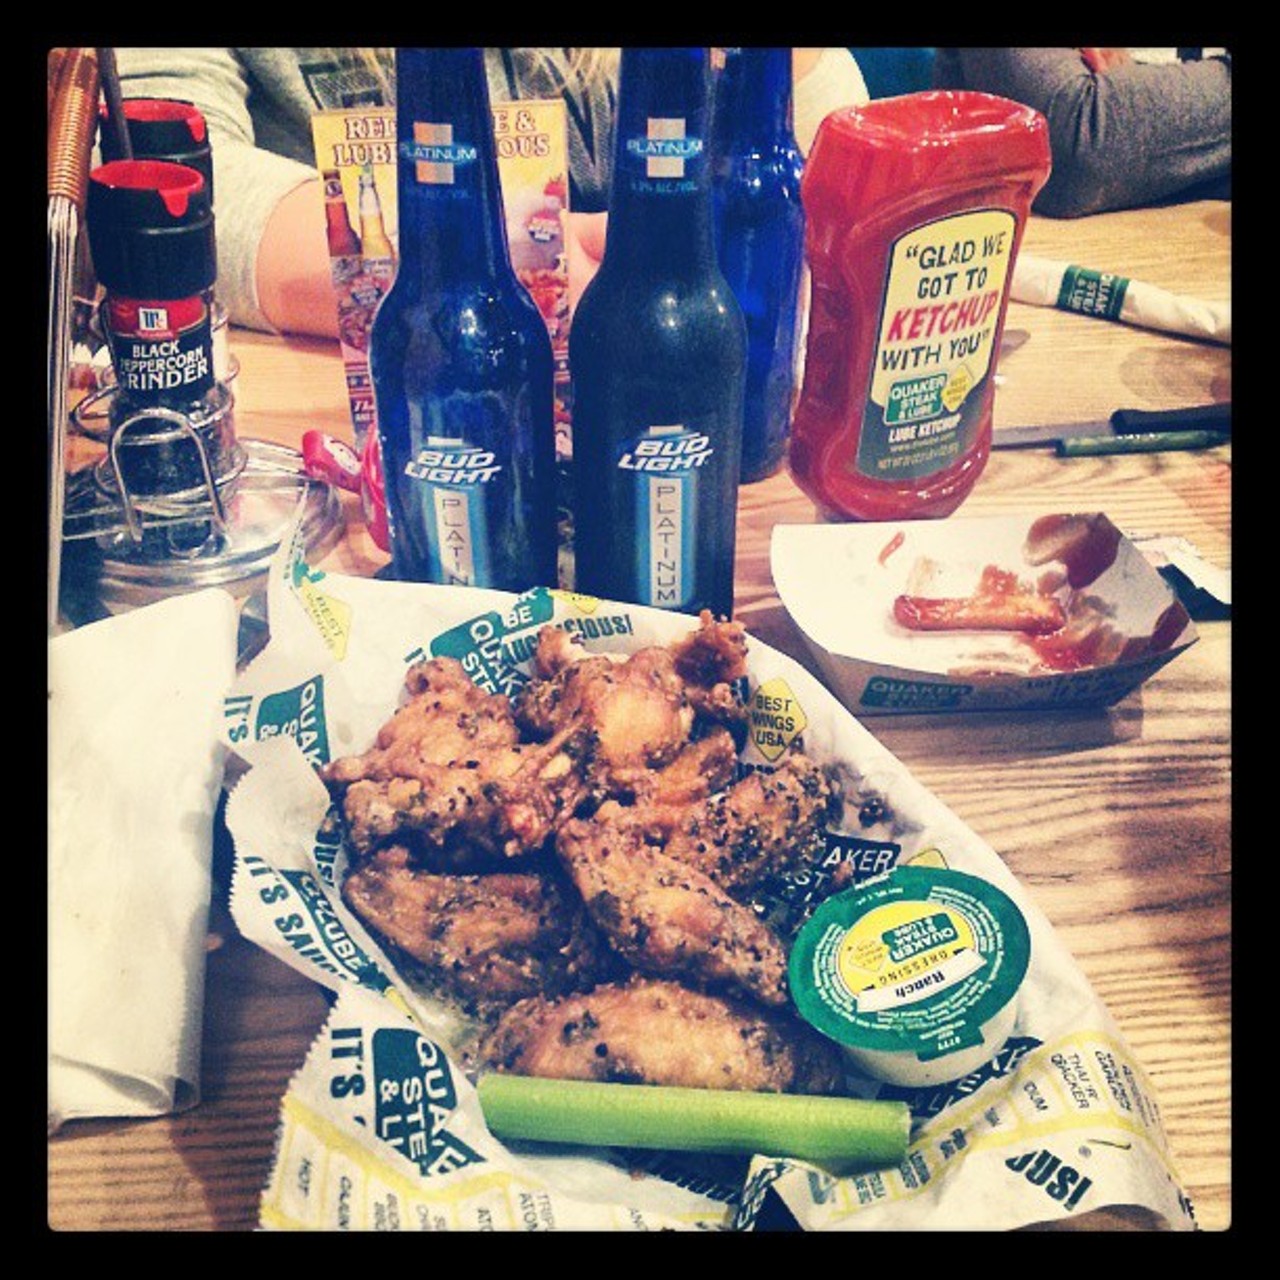 Even though it is a regional chain, Quaker Steak & Lube in Valley View has a killer AUCE Tuesday Wing Night. The restaurant sets up a buffet with endless wings, but there is a secret here. If you don't see the sauce you want, just order them from the server and they will deliver it right to your table! Quaker Steak & Lube is located at 5935 Canal Rd  
Valley View. Call 216-986-9464 or visit thelube.com for more information.